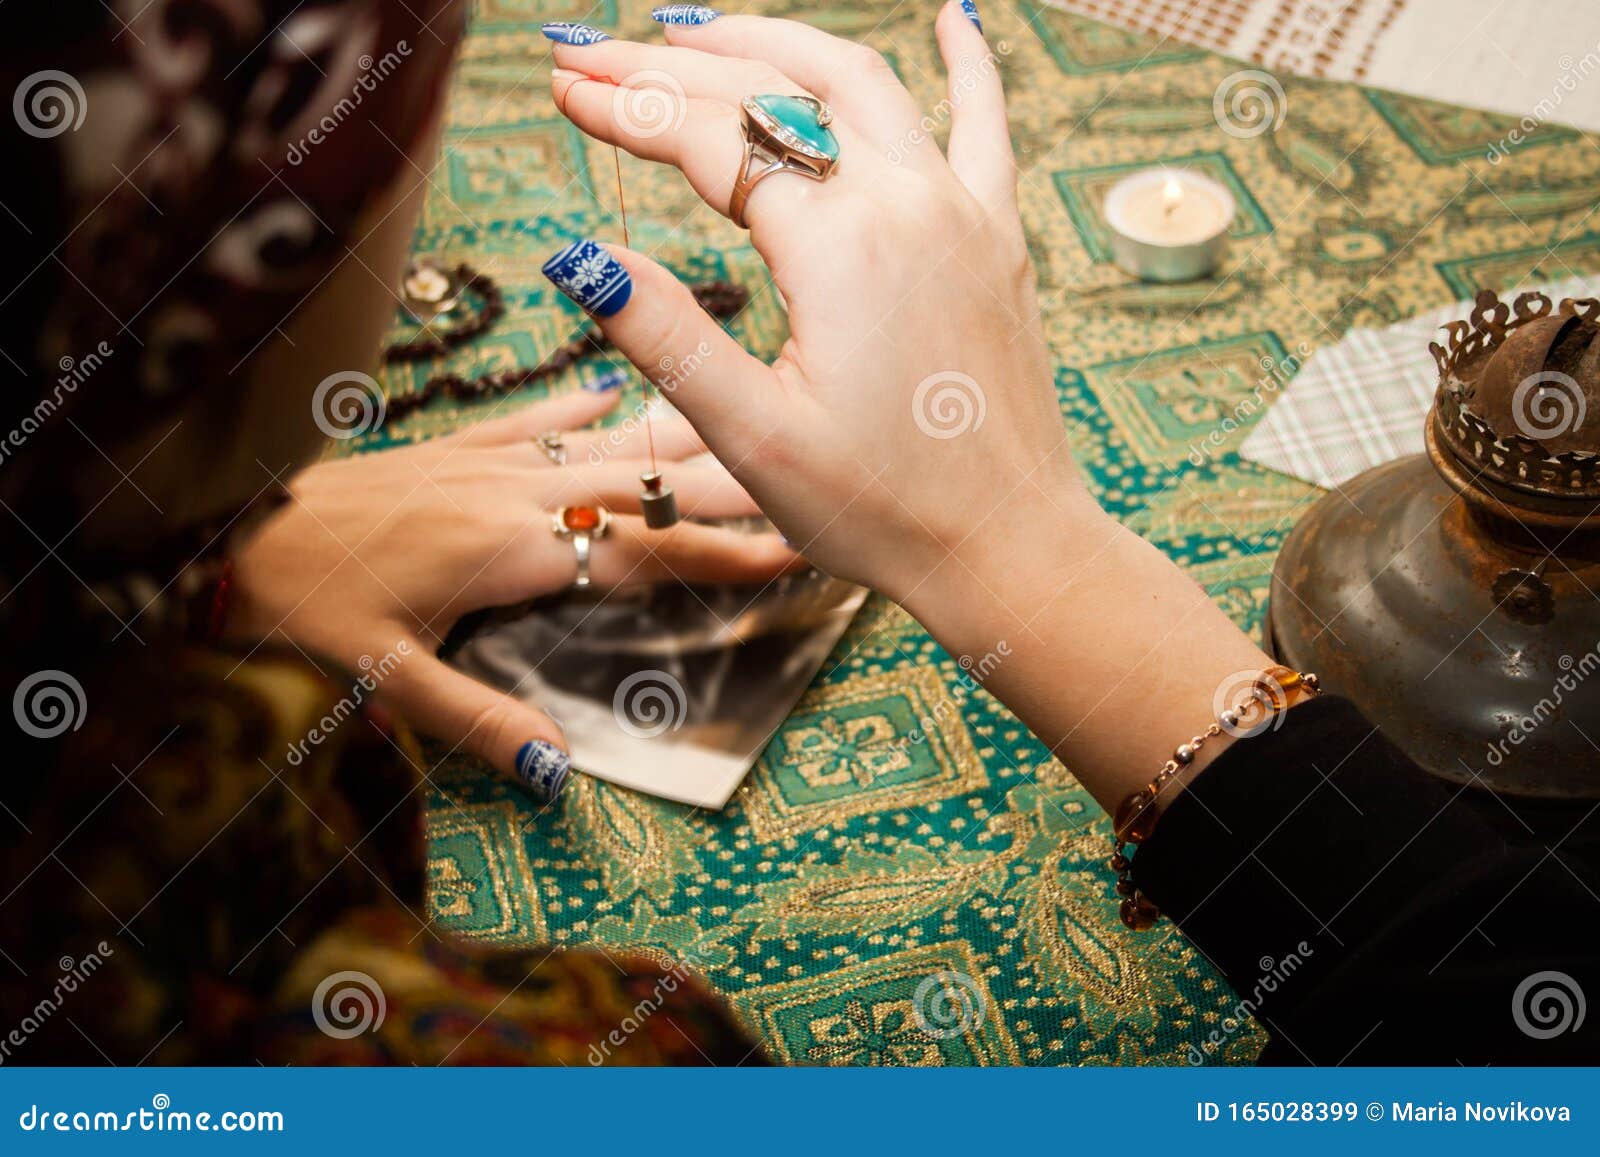 gypsy psychic looking for a man in a photo using a pendulum. love spell on photos